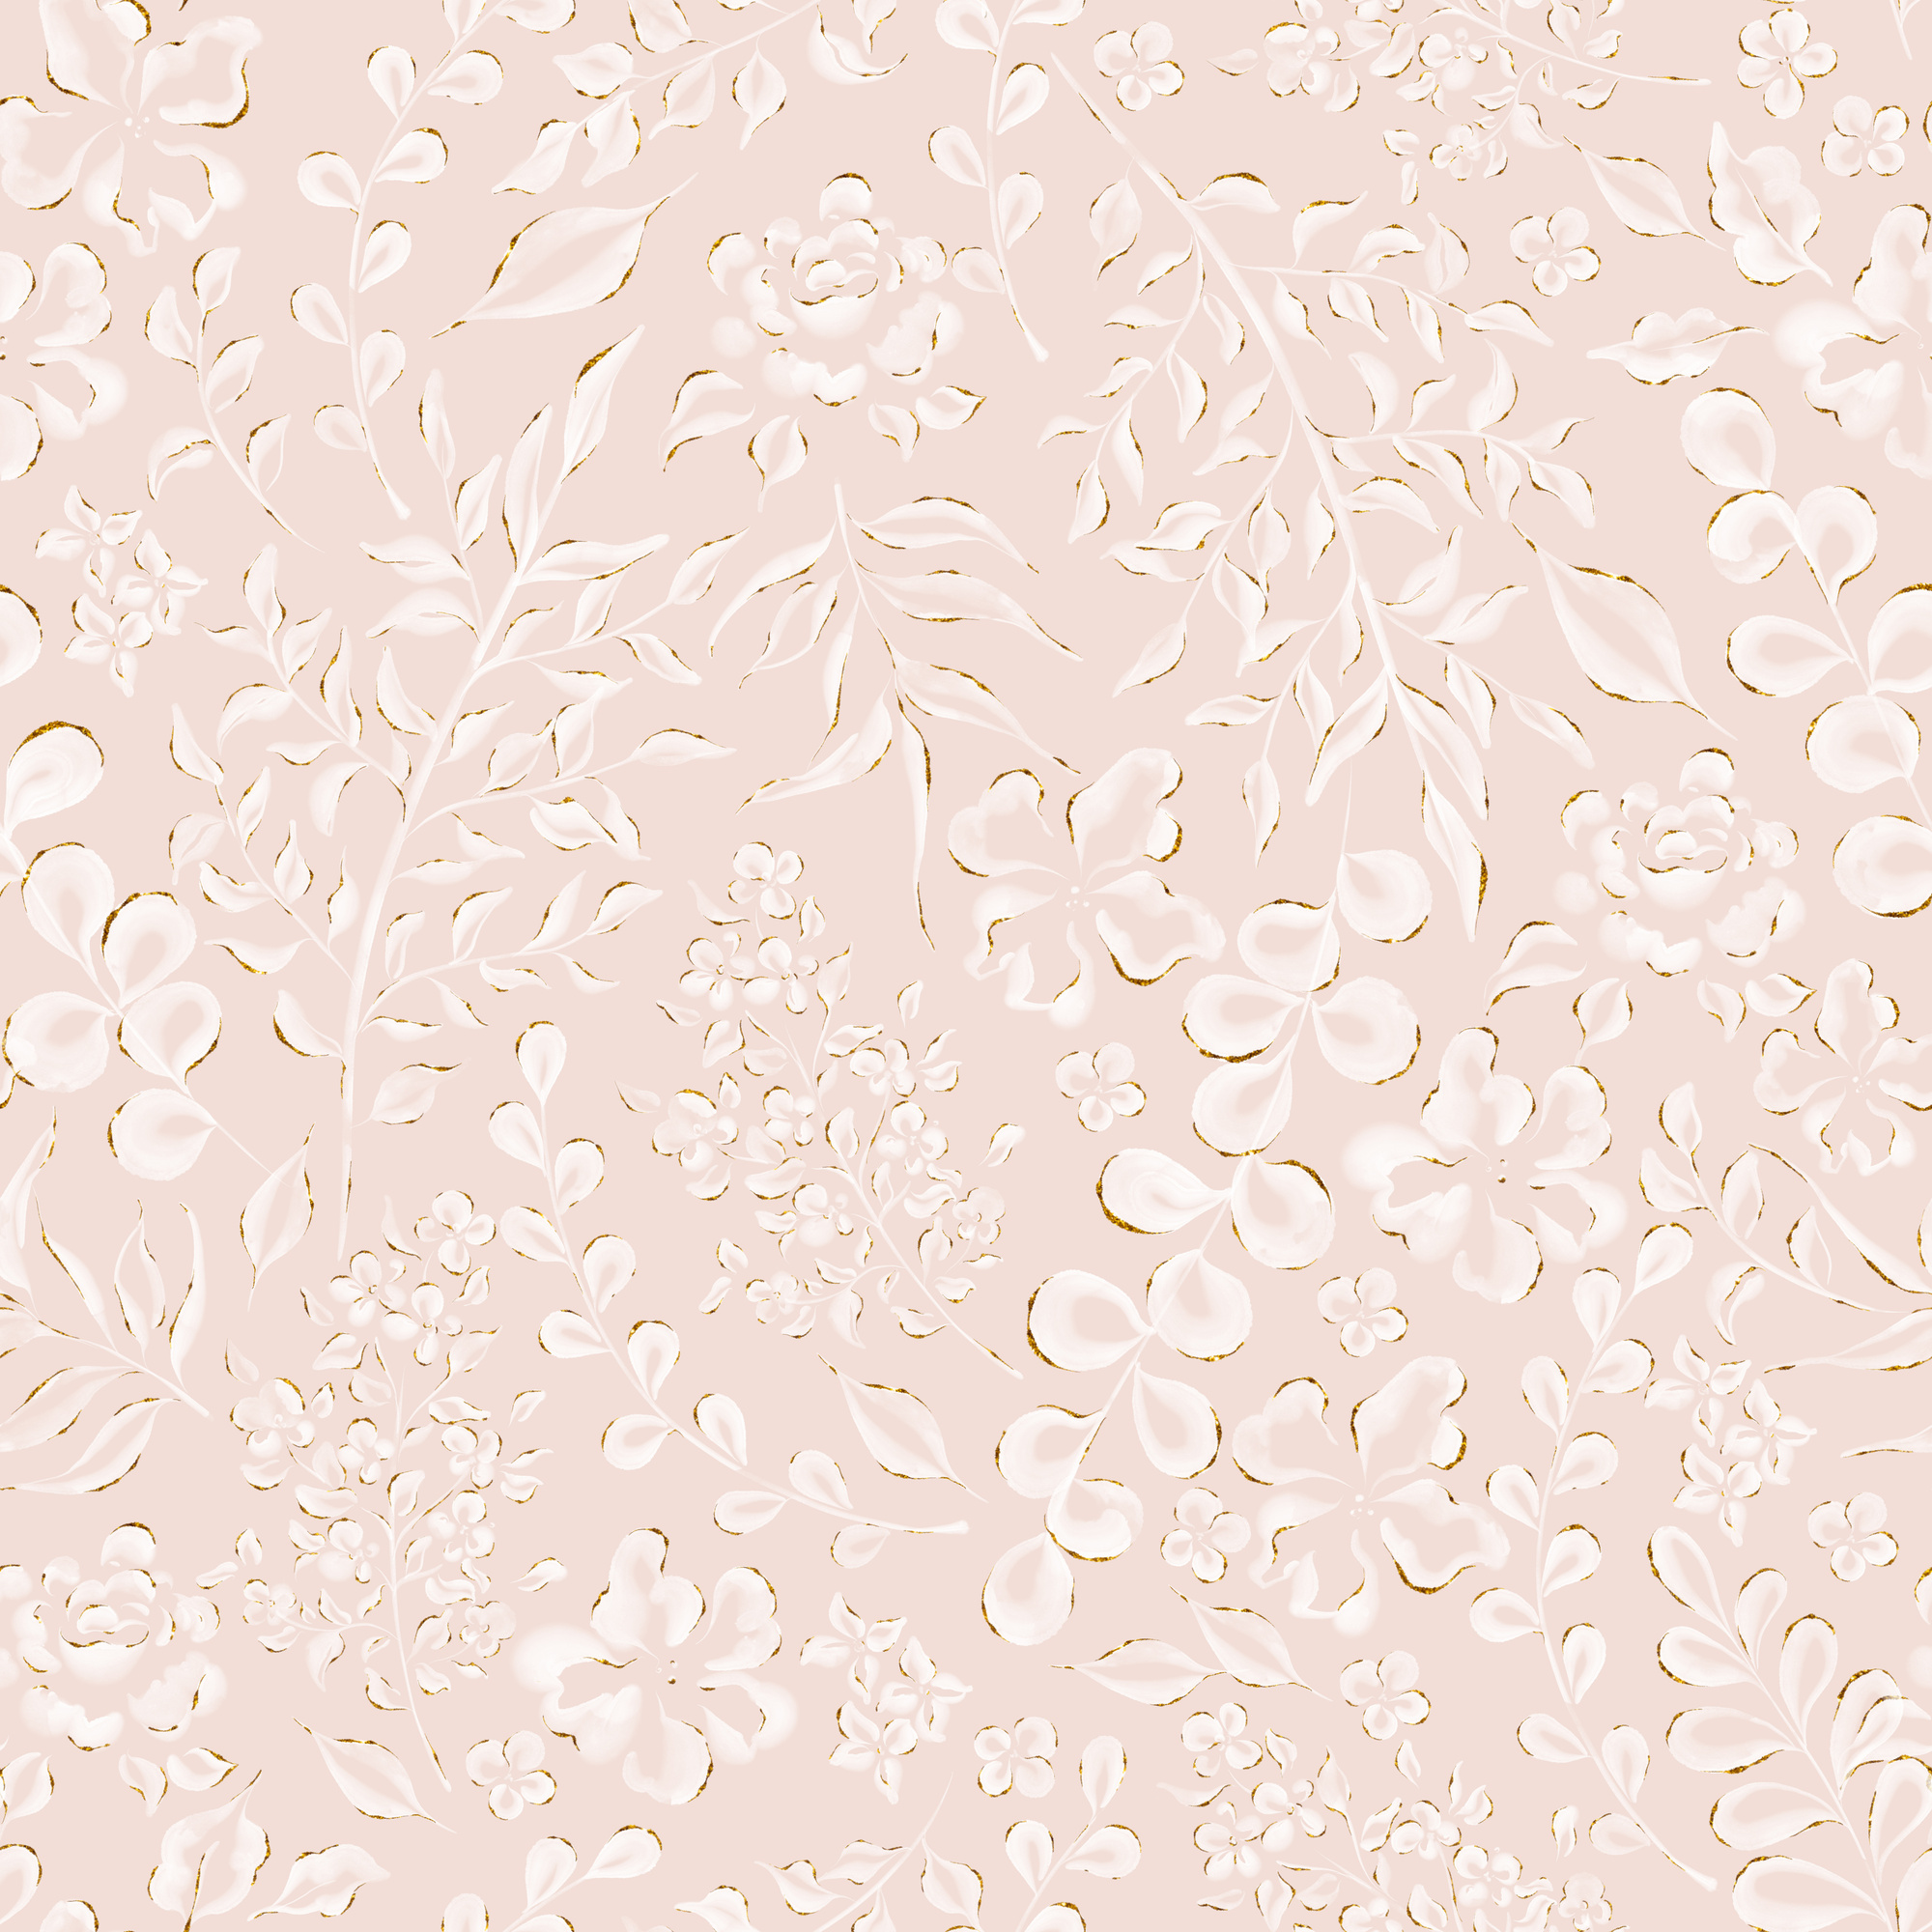 Beige Soft White and Golden Floral Seamless Pattern